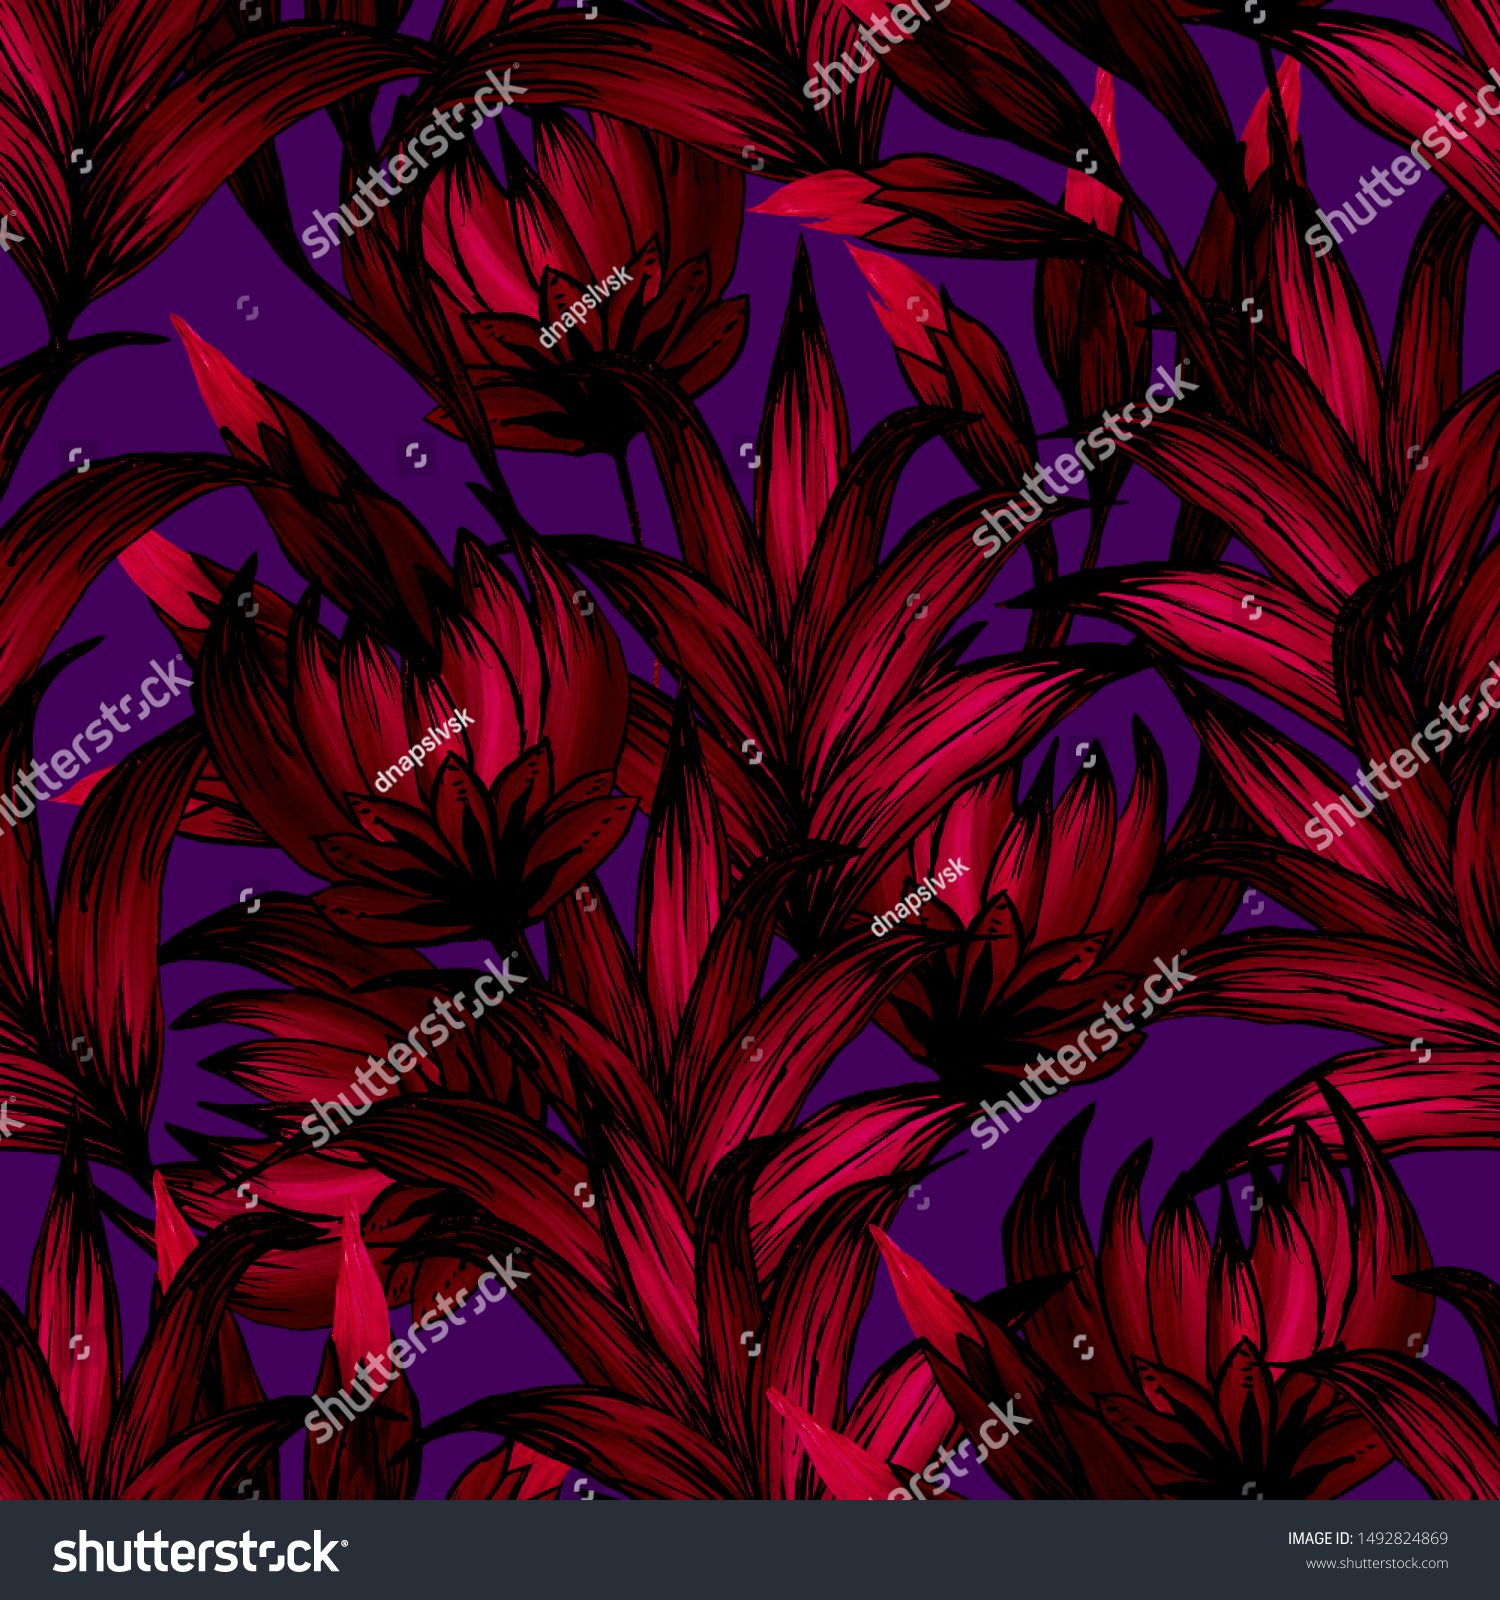 flowers and leaves drawn with red and pink colors on a dark violet background #1492824869